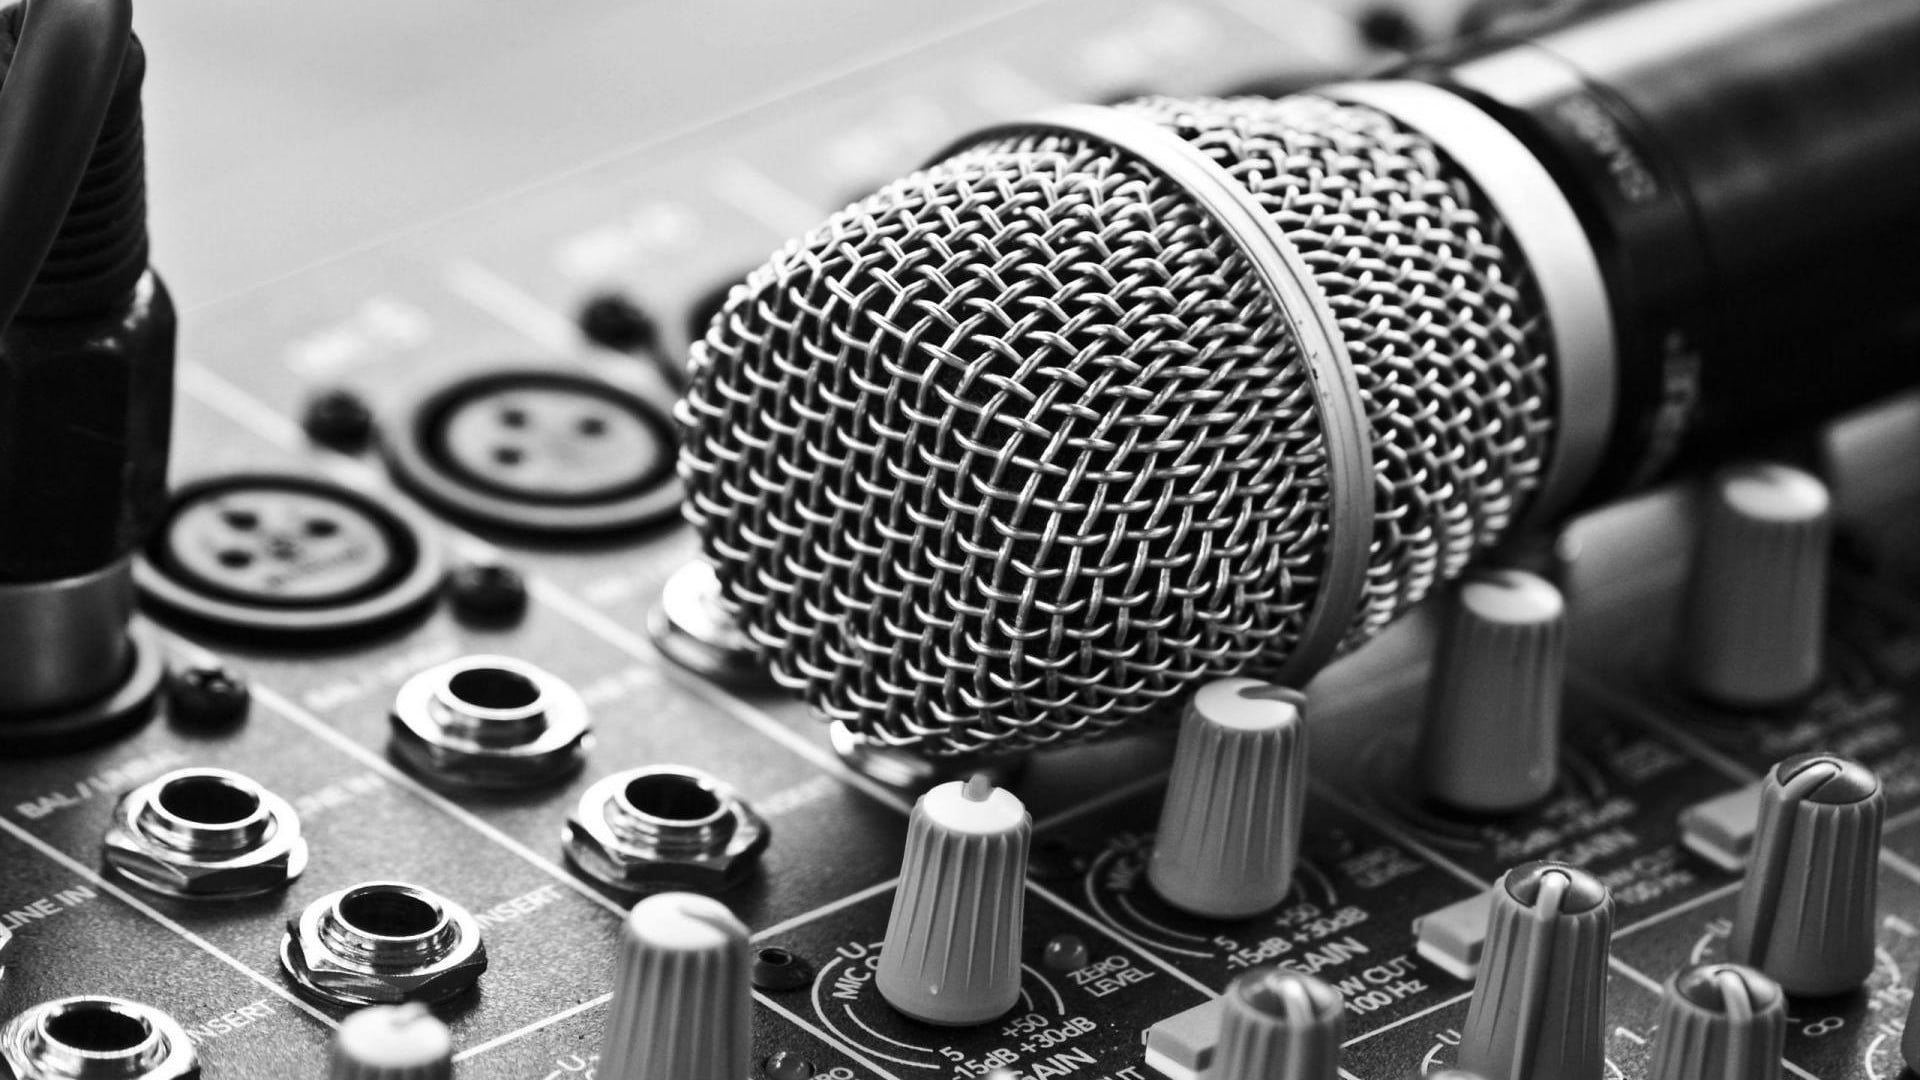 black and gray microphone and mixing console, monochrome, photography, closeup, microphone